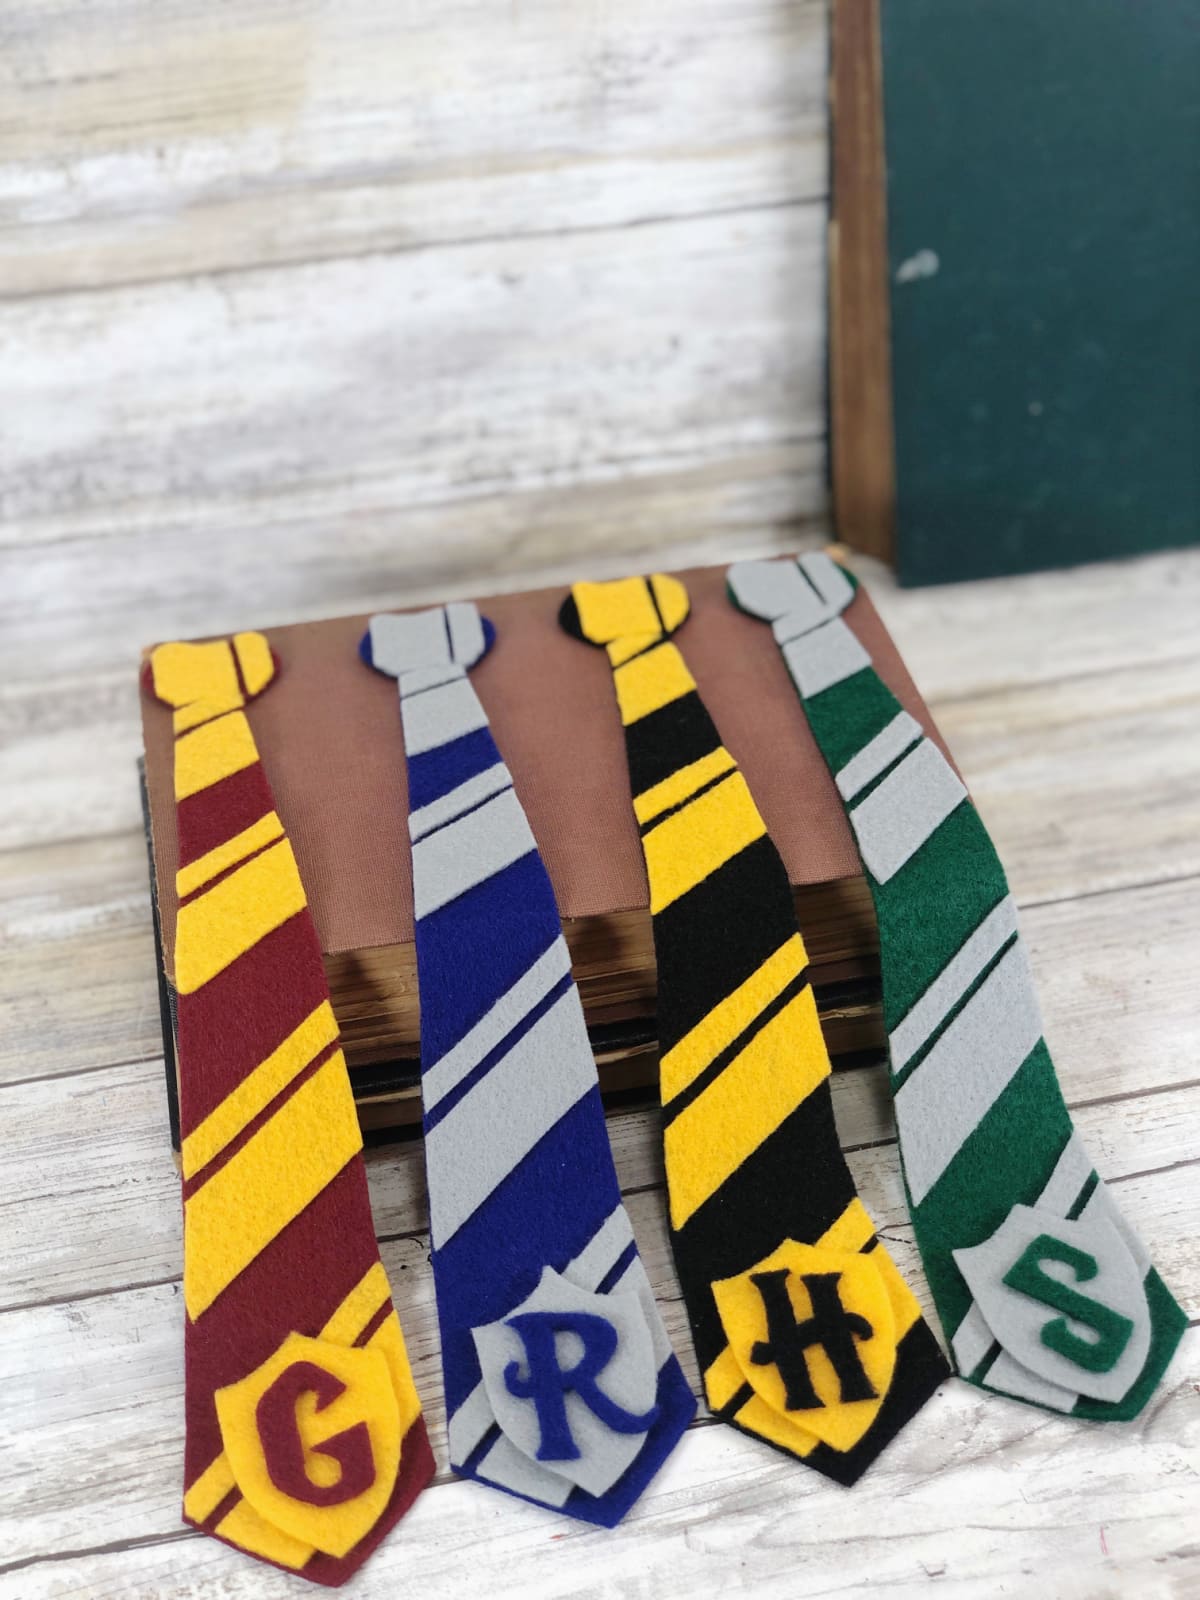 Completed Harry Potter bookmarks draped over book